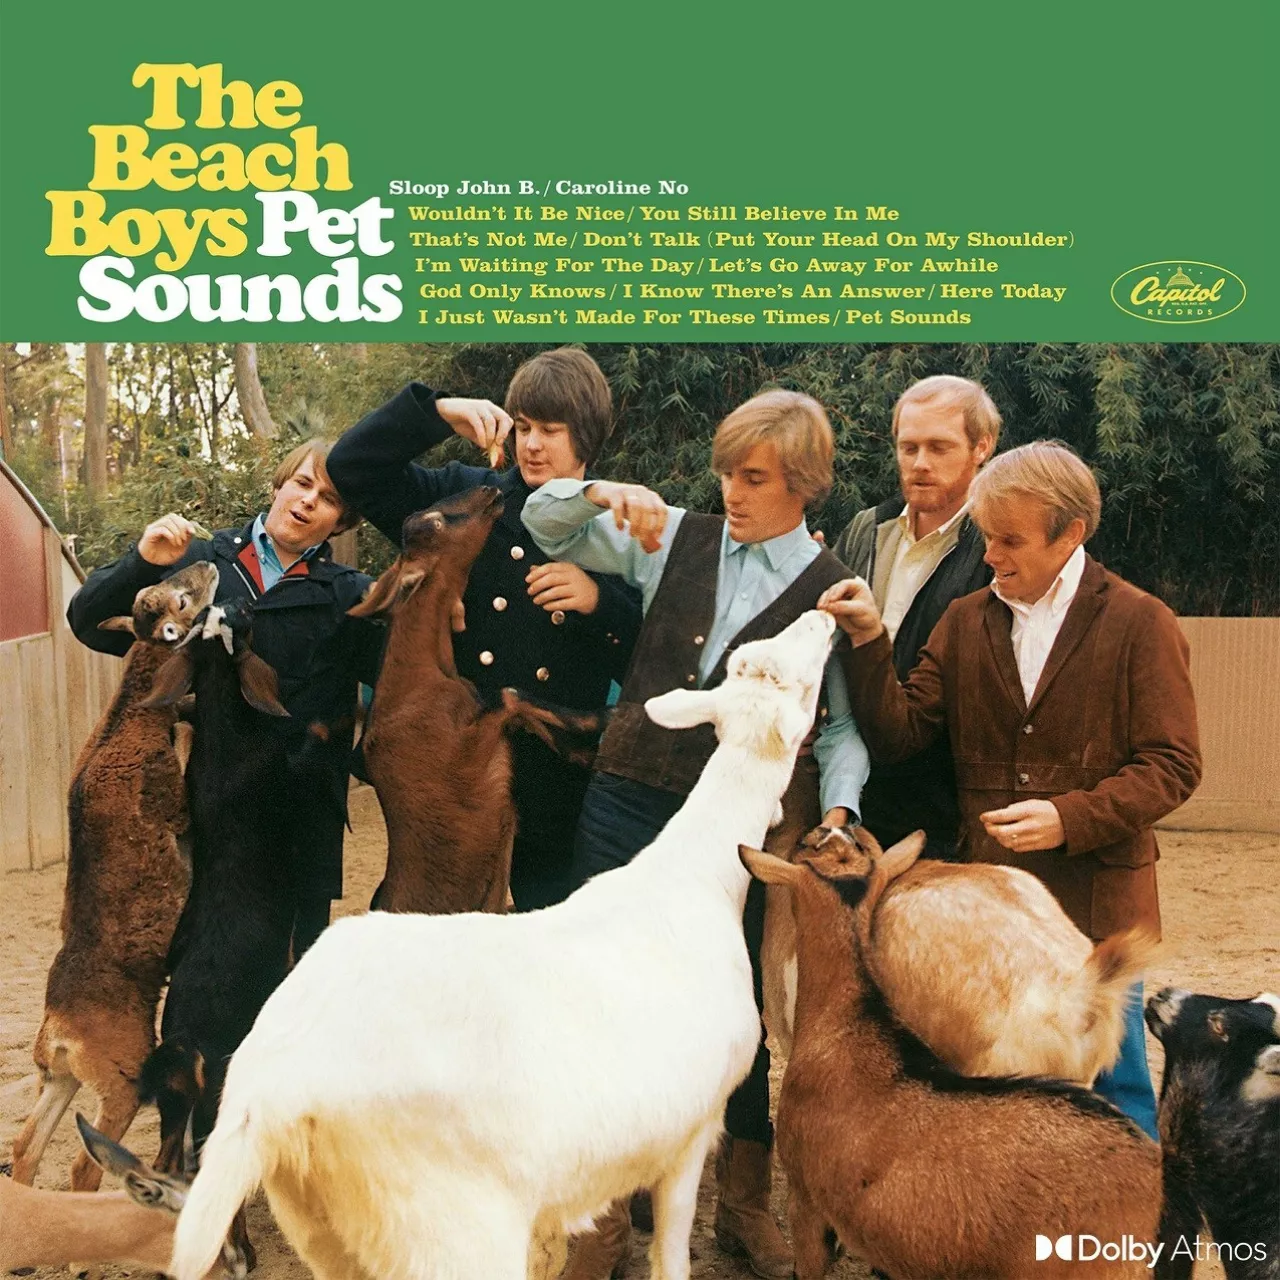 The Beach Boys' masterpiece, "Pet Sounds," has been mixed in Dolby Atmos by renowned, multiple GRAMMY®-winning producer Giles Martin. img#1